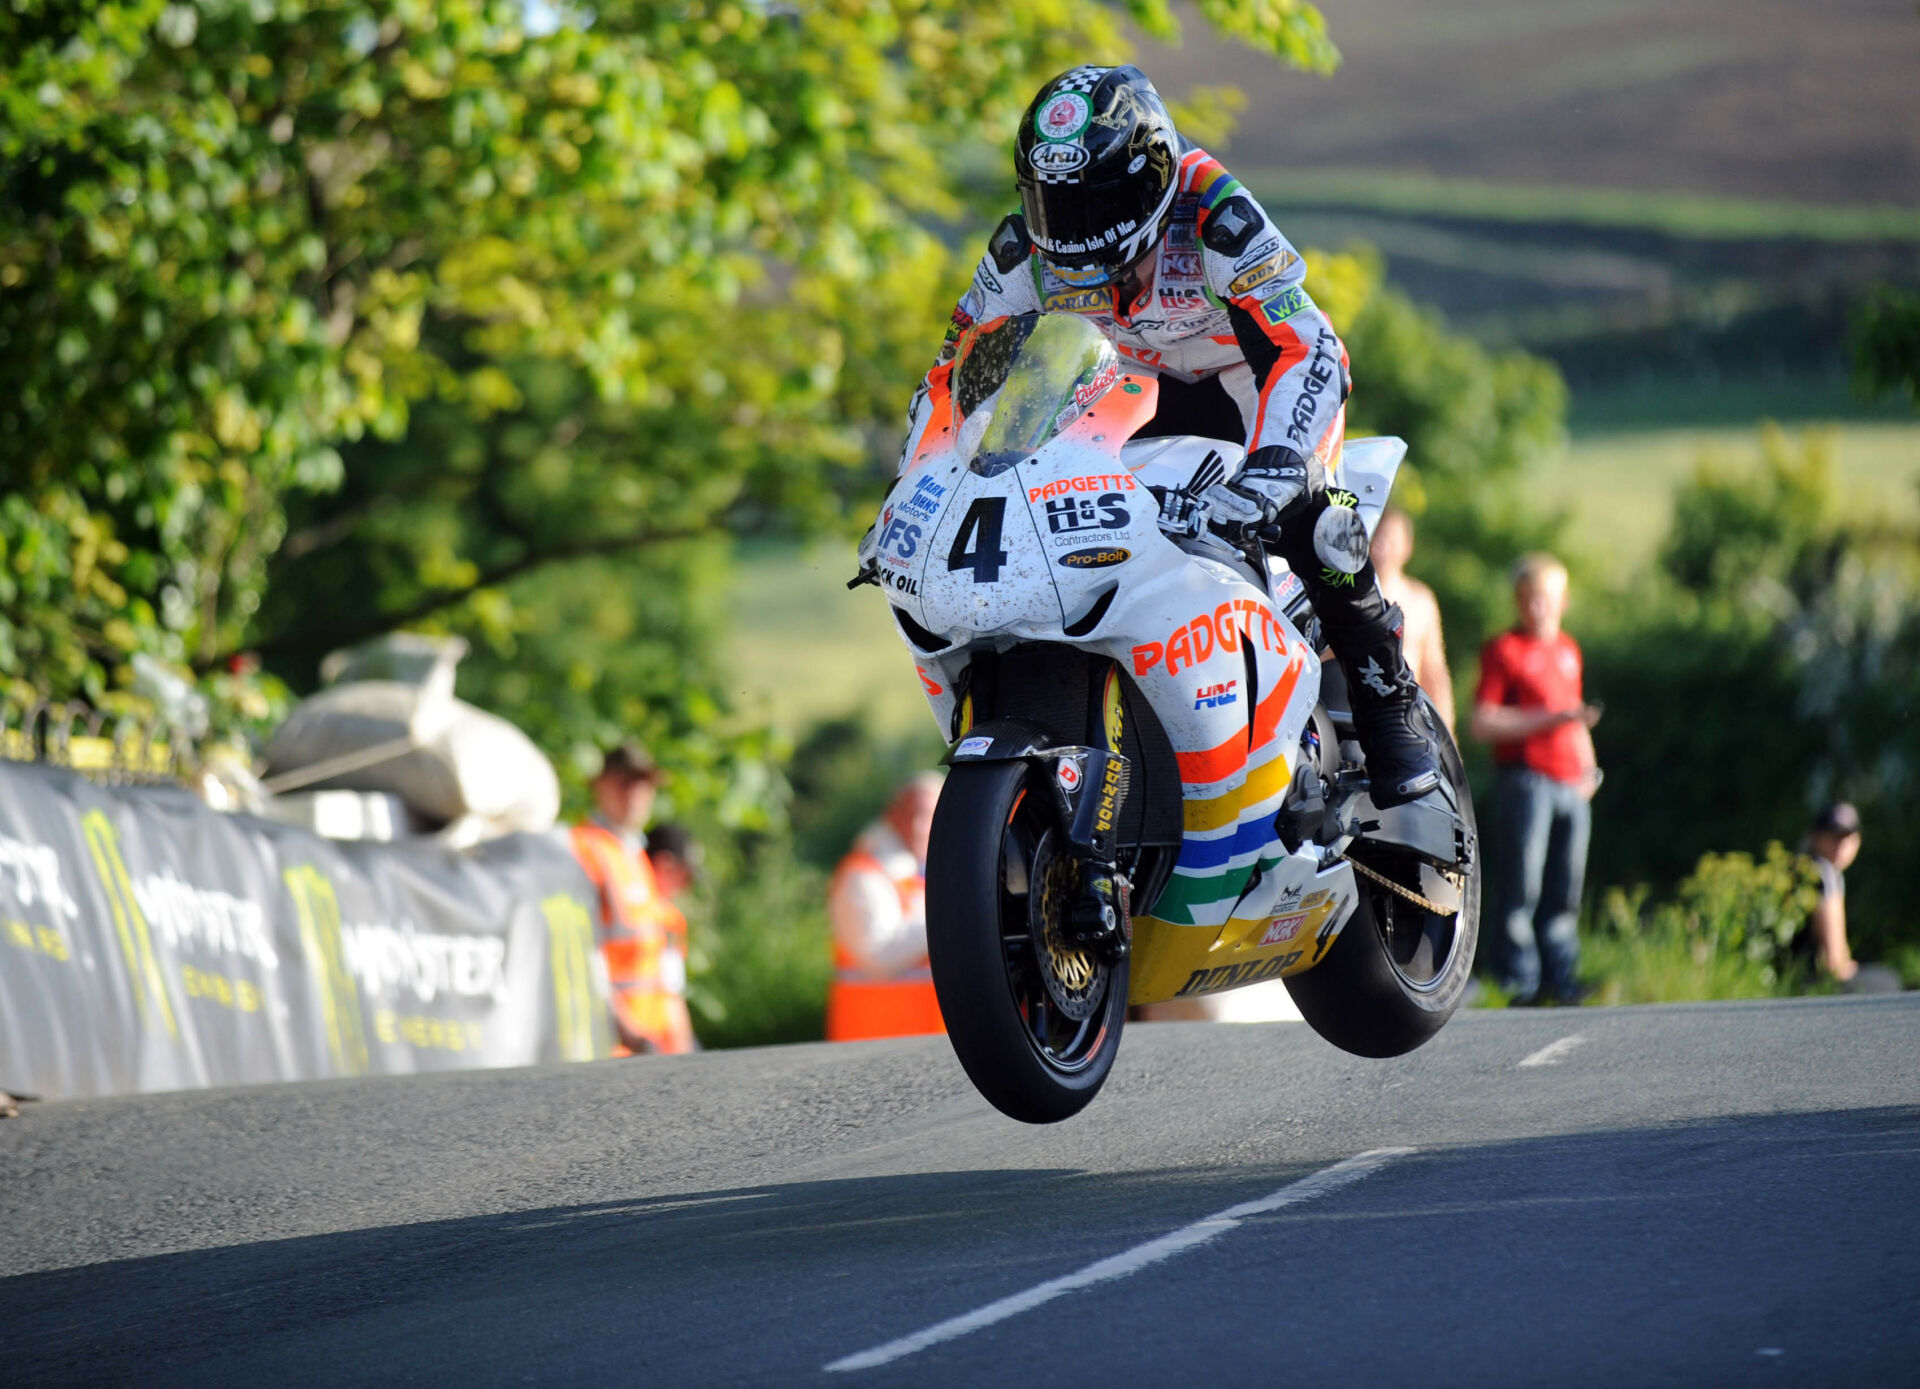 Ian Hutchinson (4) in action during the 2010 Isle of Man TT, when he won five races - a record still unmatched to this day. Photo courtesy Isle of Man TT Press Office.